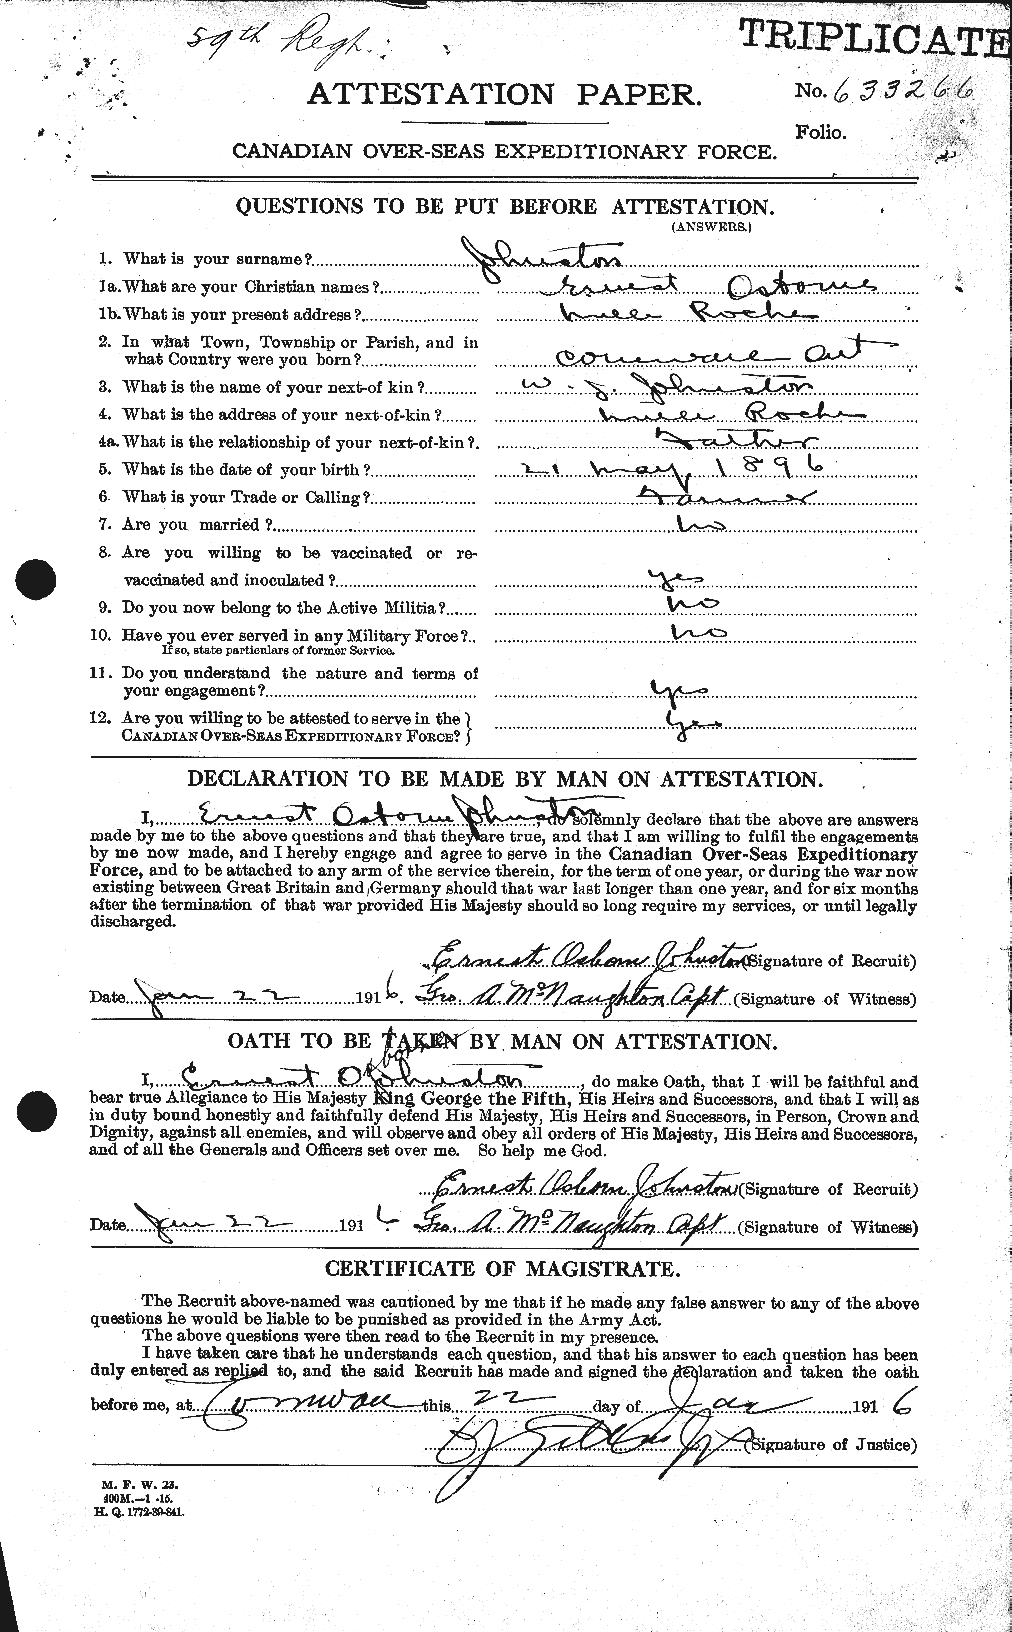 Personnel Records of the First World War - CEF 423248a